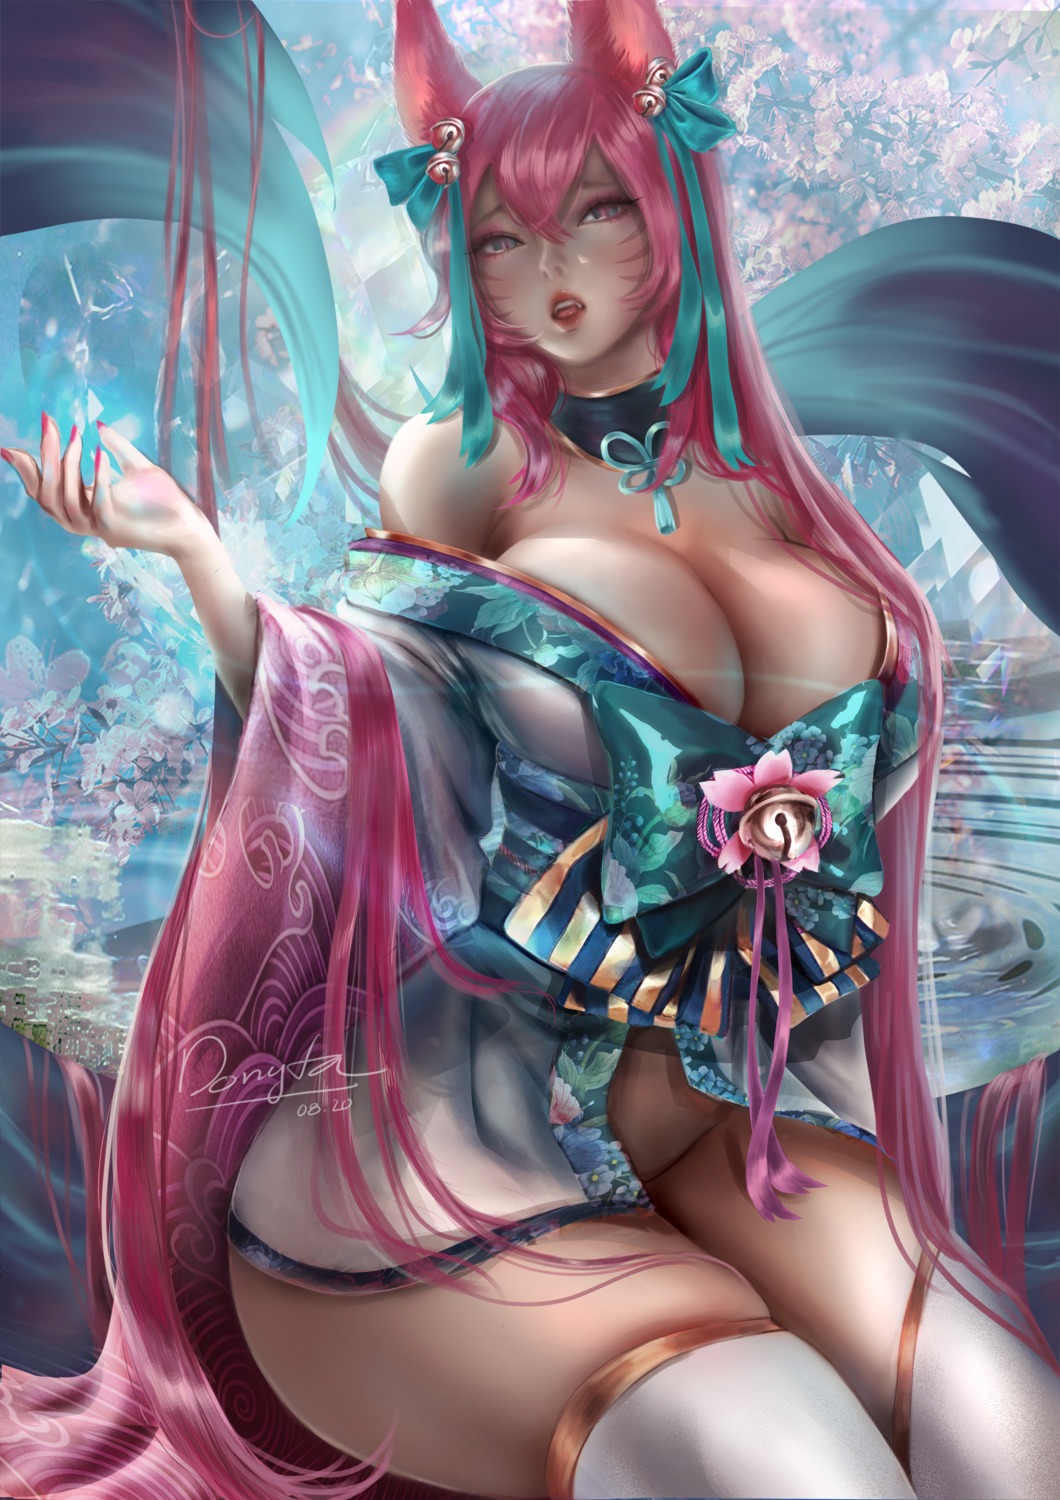 ahri animal_ears donyta japanese_clothes kitsune league_of_legends no_bra nopan open_shirt tail thighhighs